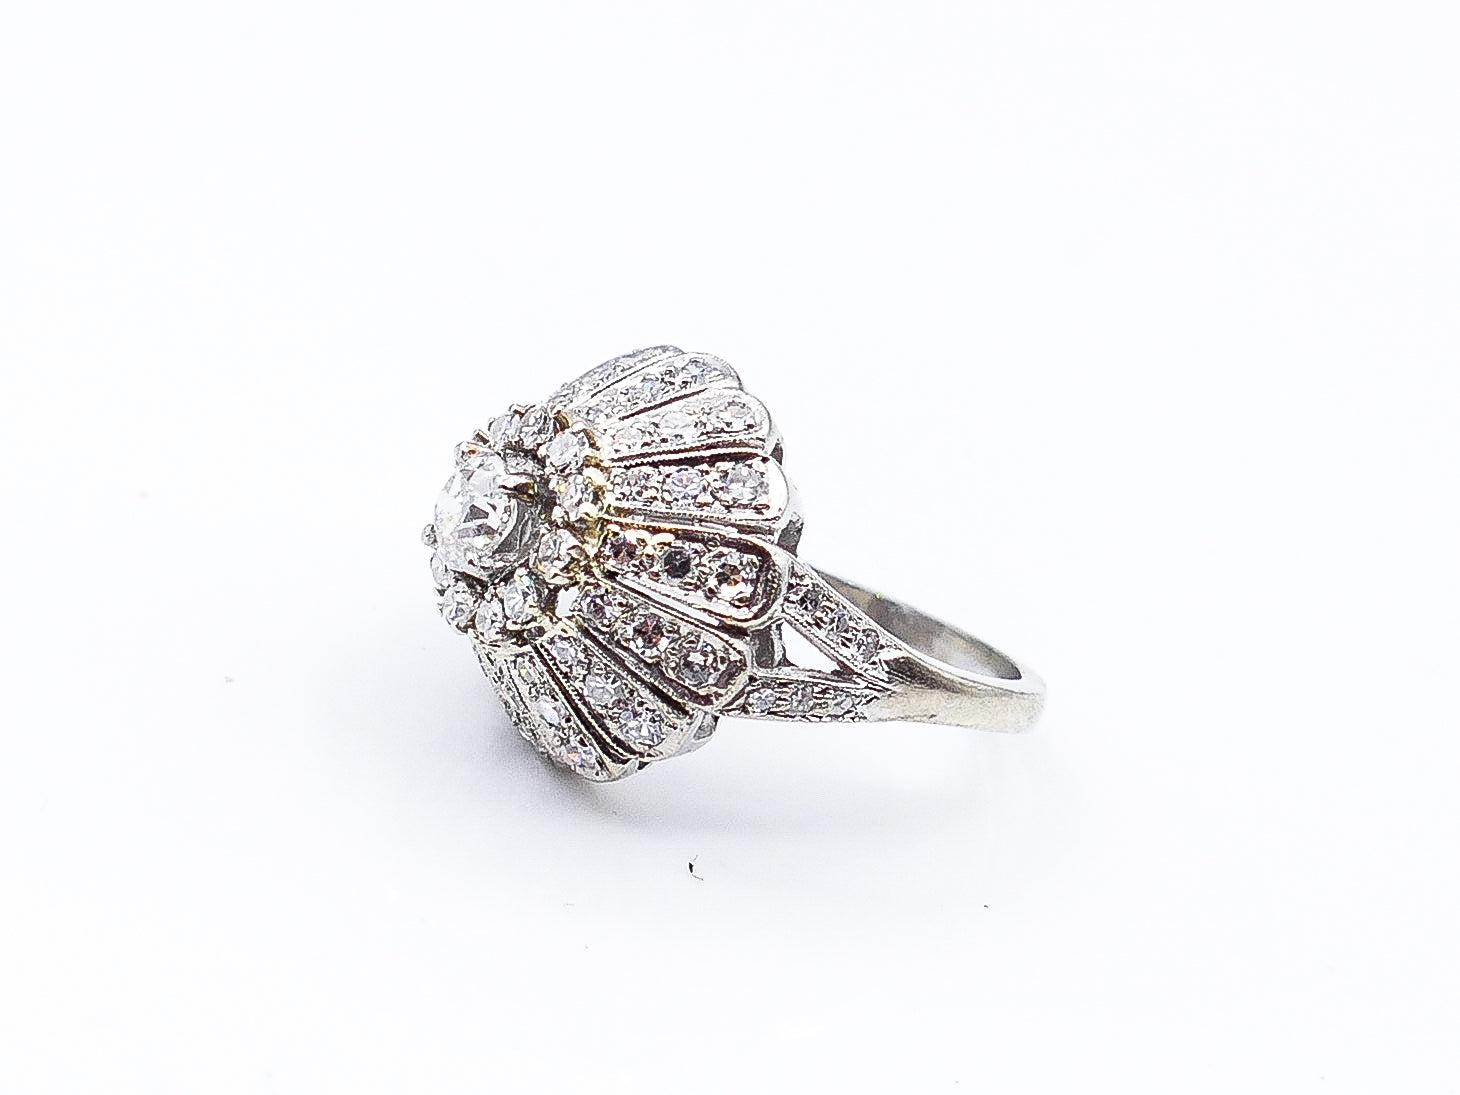 This elegant antique 14 karat white gold, diamond dome ring shines bright with 65 small, pave-set, round diamonds that culminate in petals and peak to a large center, old miner's cut diamond, weighing at 2 carats in total. This 1920's piece is a